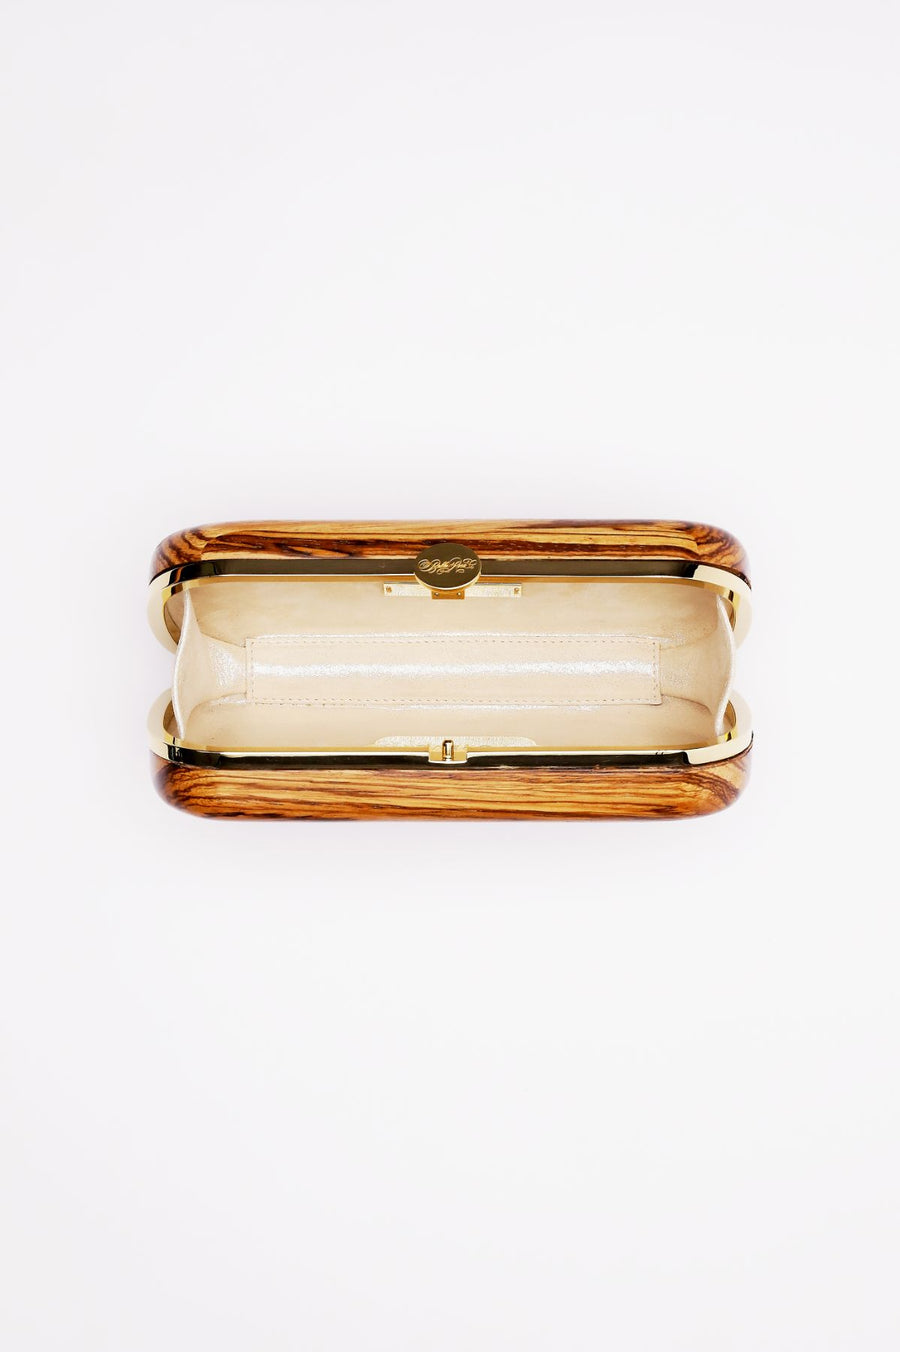 An open, empty The Bella Rosa Collection Bella Clutch African Zebra Wood Petite purse made of sustainably sourced African Zebra Wood with a fabric interior on a white background.